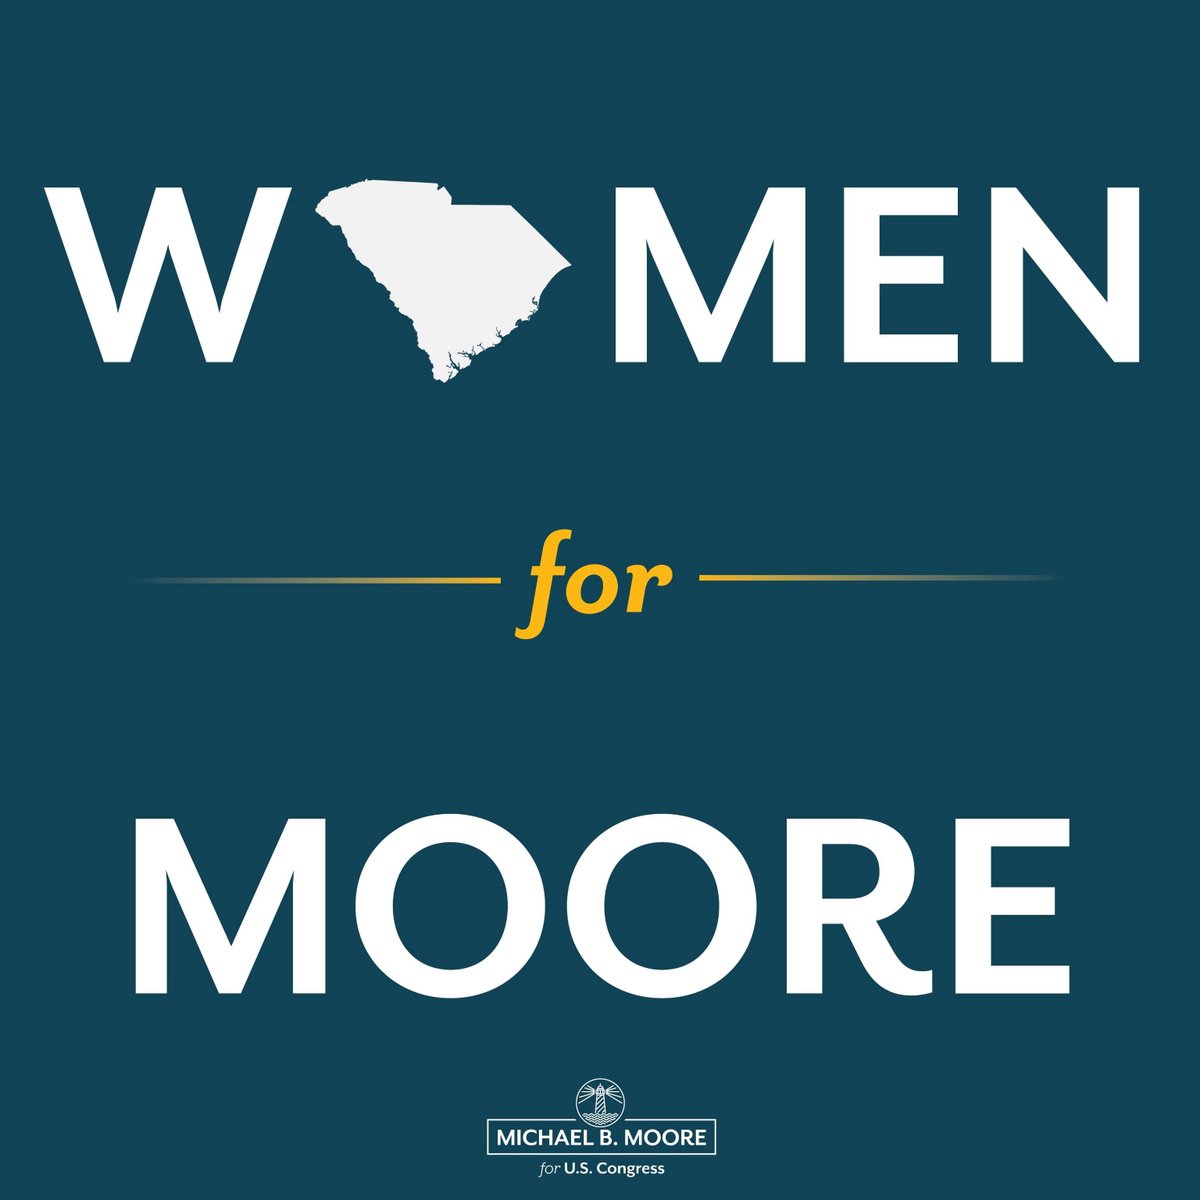 From reproductive freedom to our kids’ education, the women of #SC01 have so much on the line this November. That’s why we’re launching “Women for Moore” — a diverse coalition of Lowcountry leaders, organizers, and working moms. Join our movement today: docs.google.com/forms/d/e/1FAI…